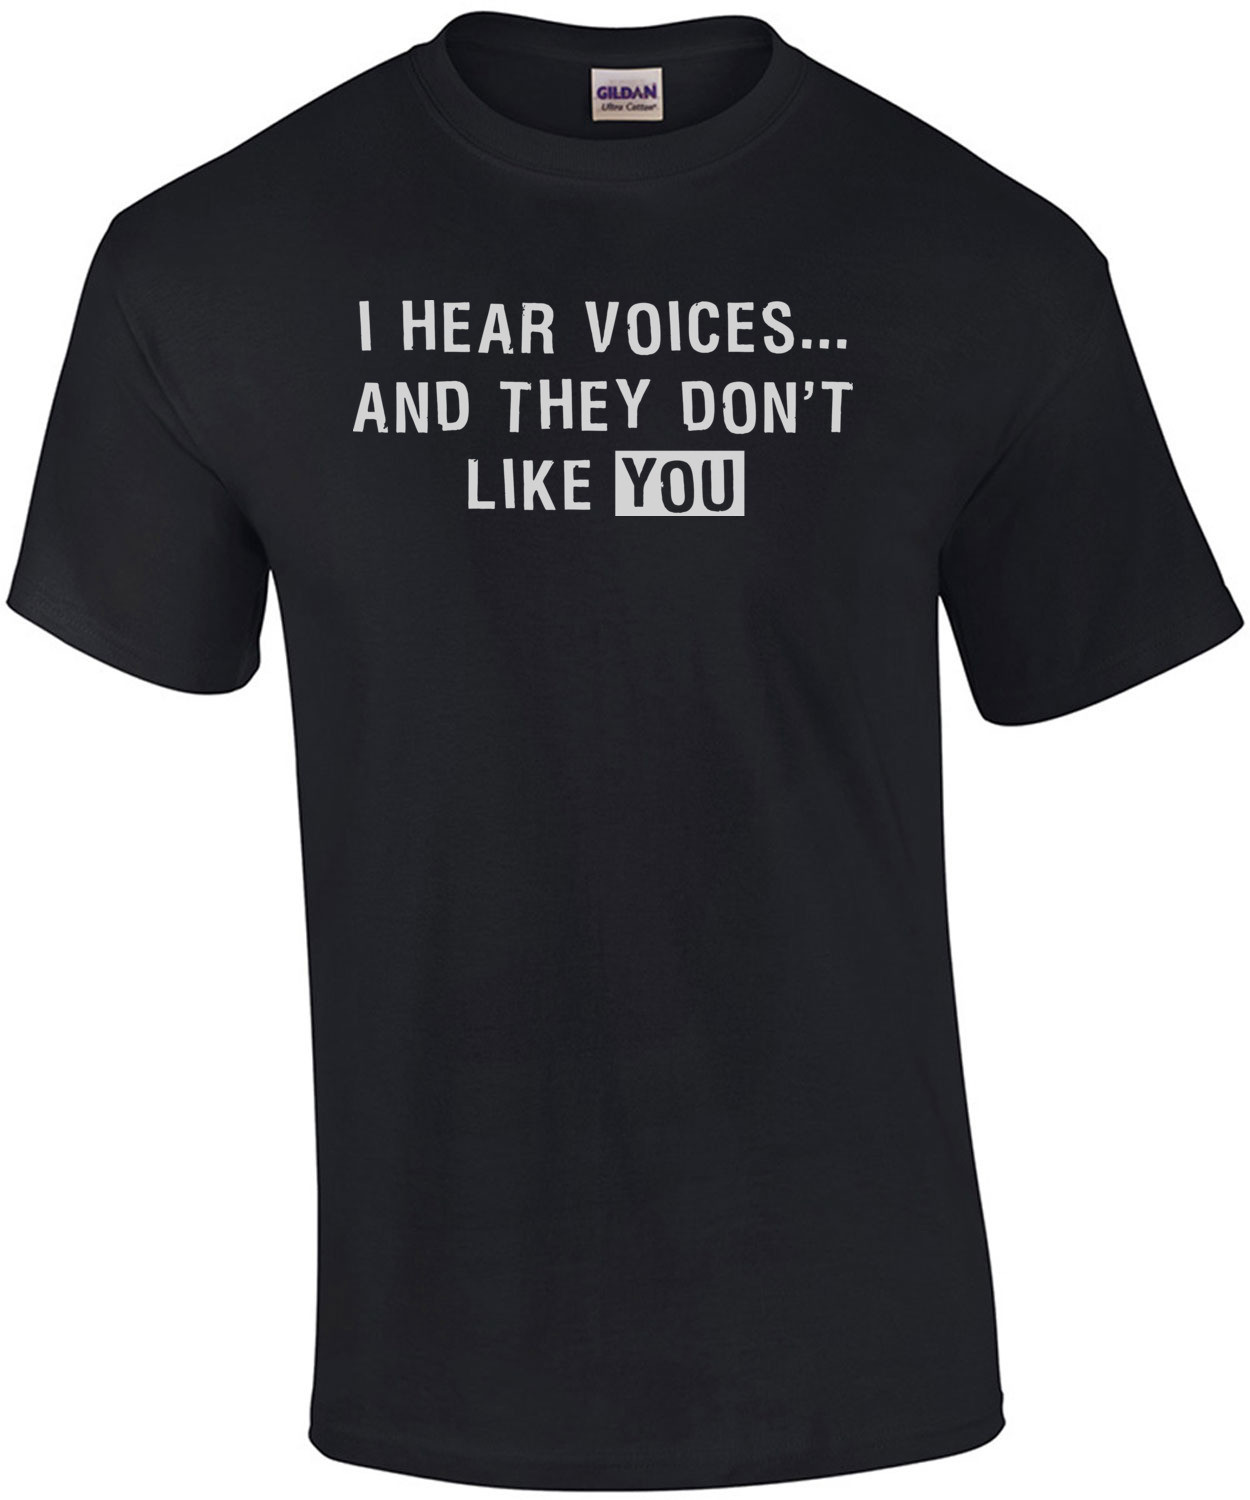 I Hear Voices And They Don't Like You T-shirt